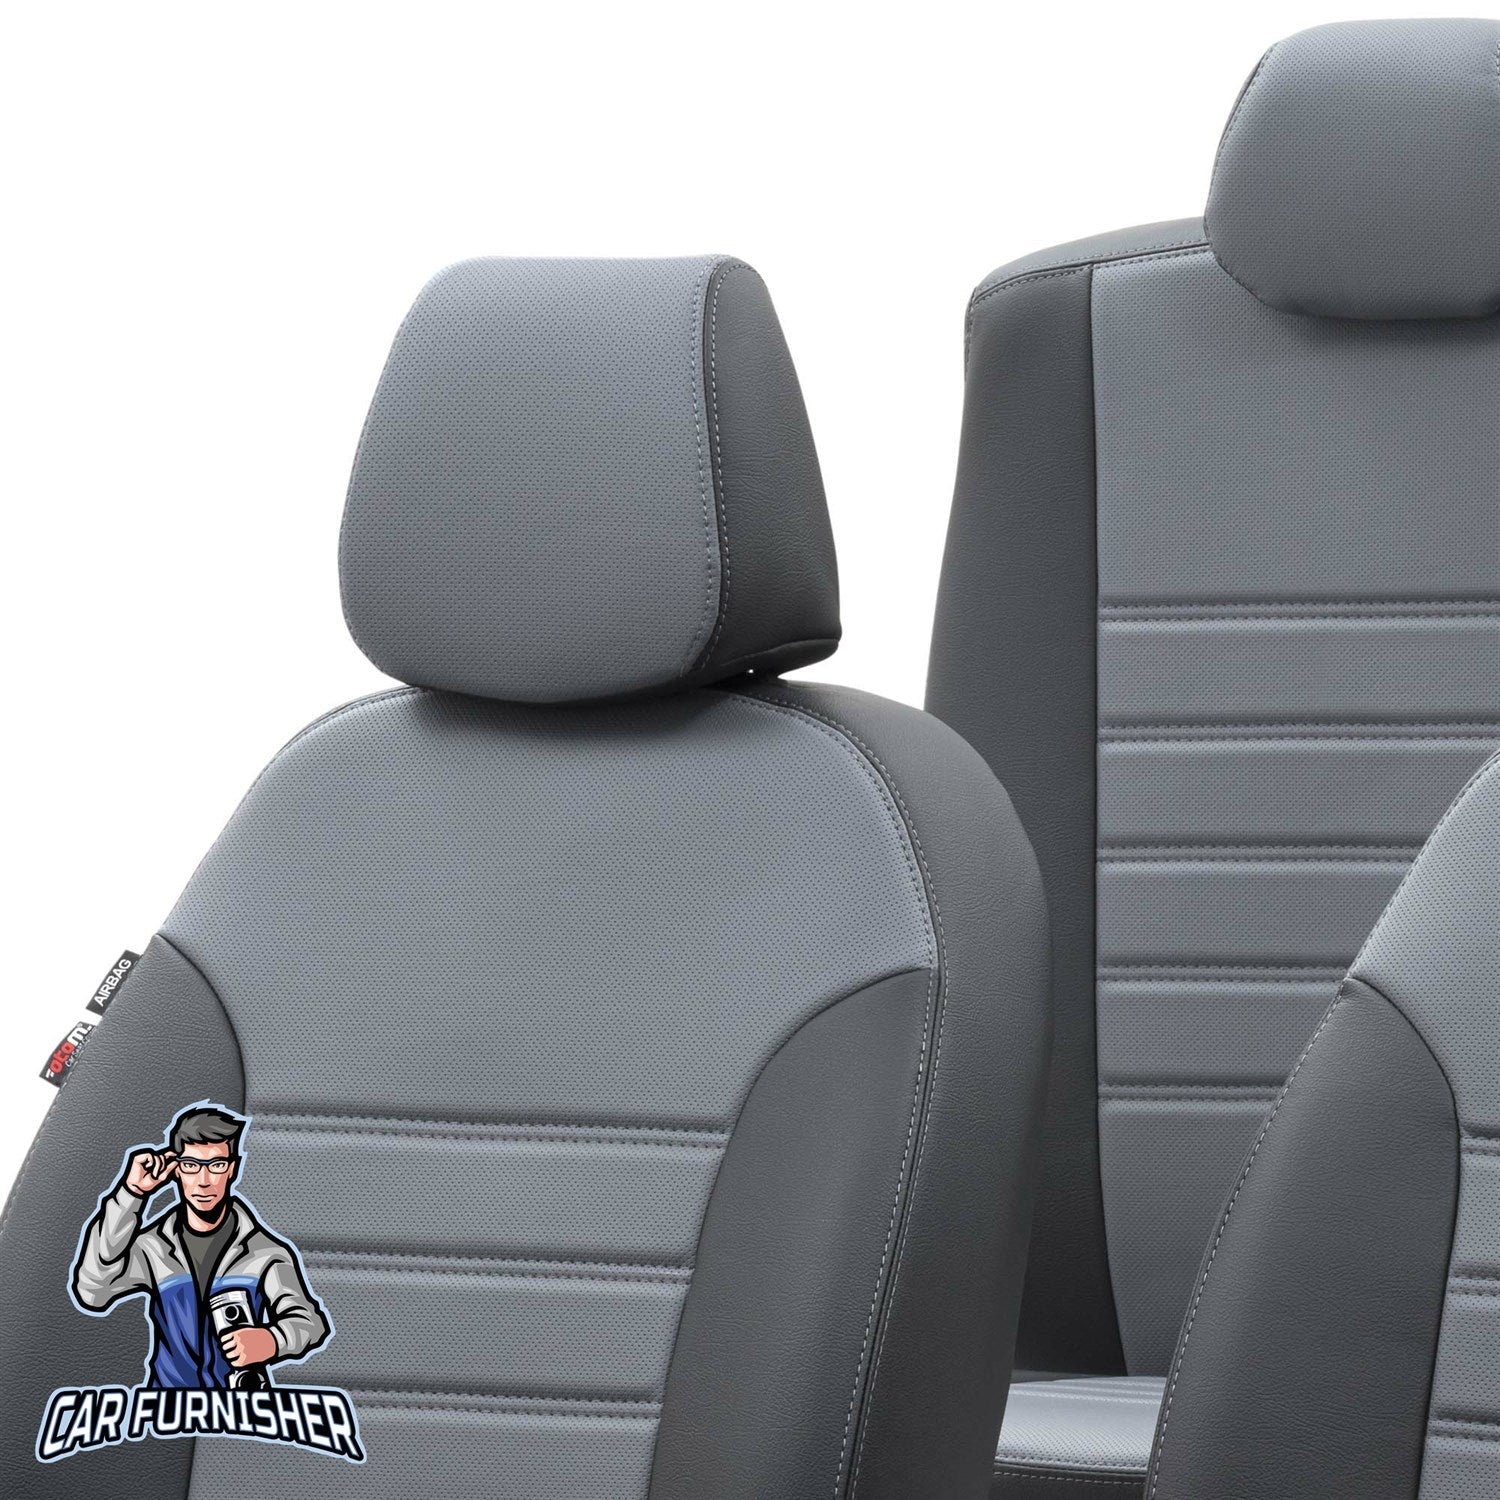 Toyota Prius Seat Cover Istanbul Leather Design – Carfurnisher